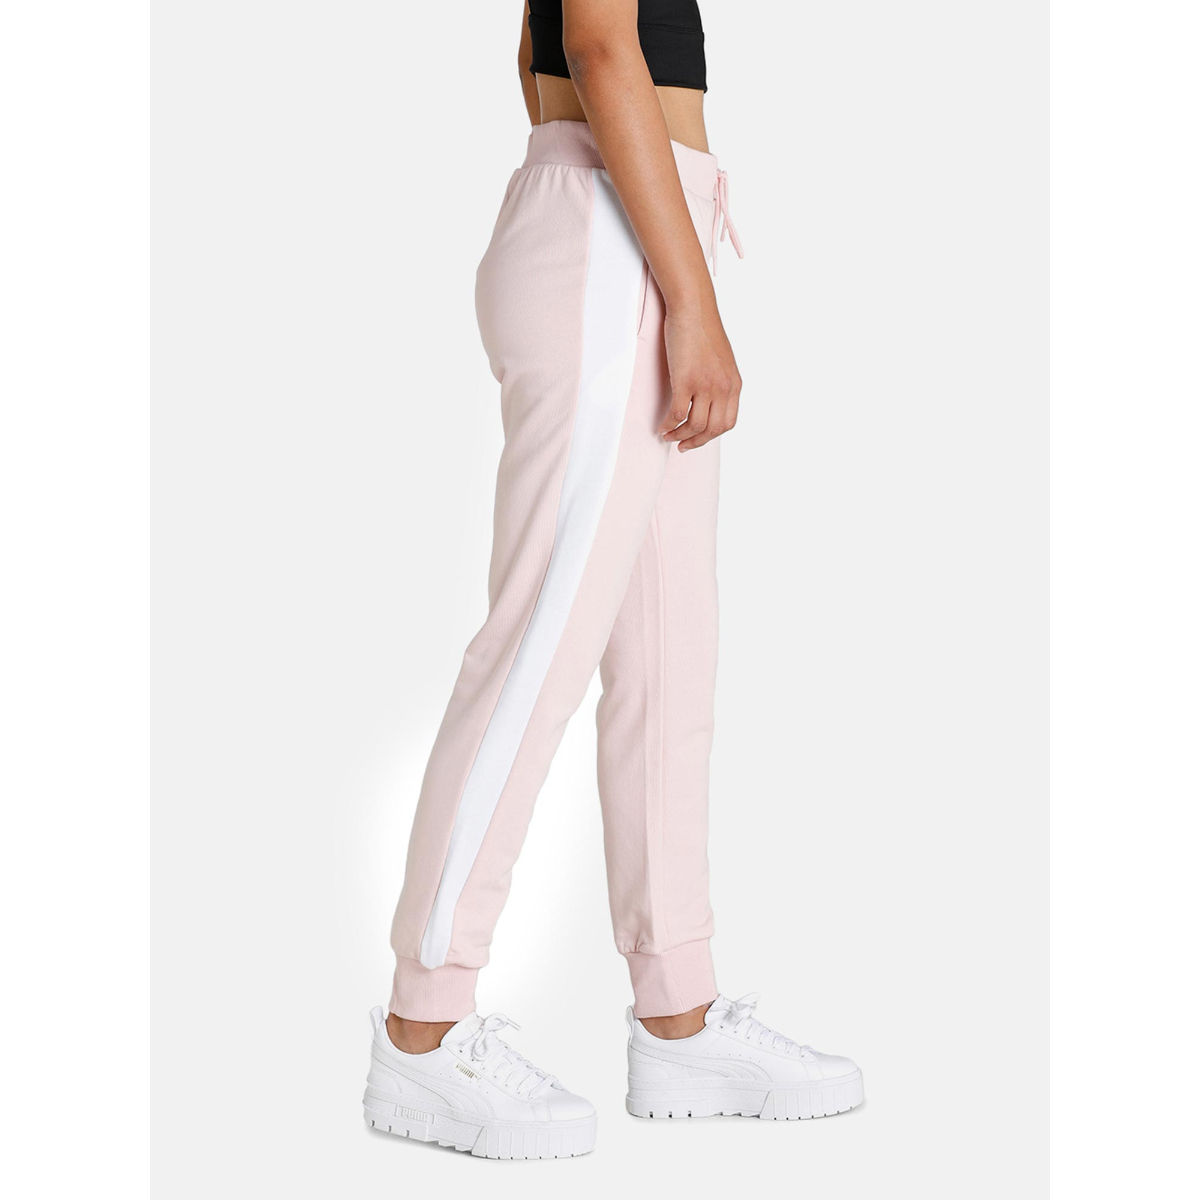 Puma Iconic T7 Track Pants Womens Pink Casual Athletic Bottoms 53008363 |  eBay